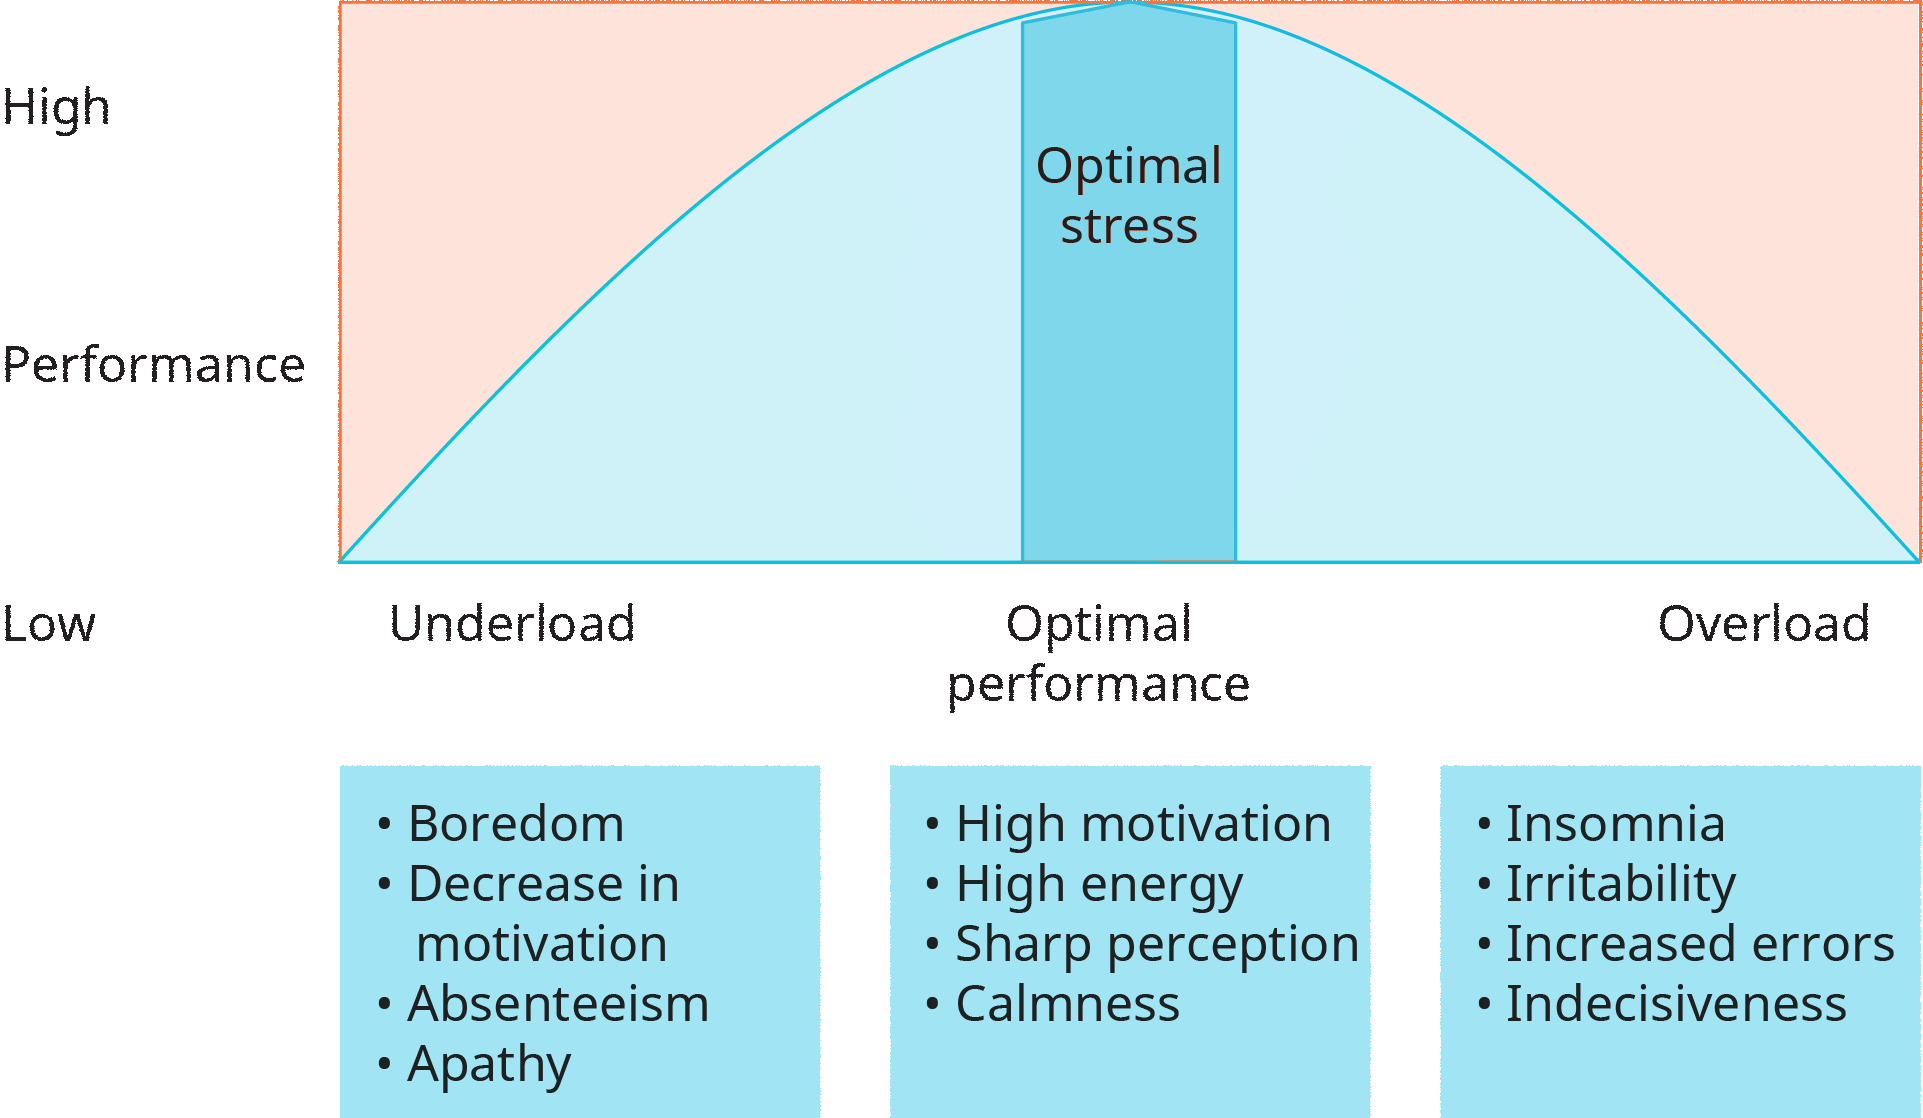 An illustration shows a graph depicting the underload-overload continuum